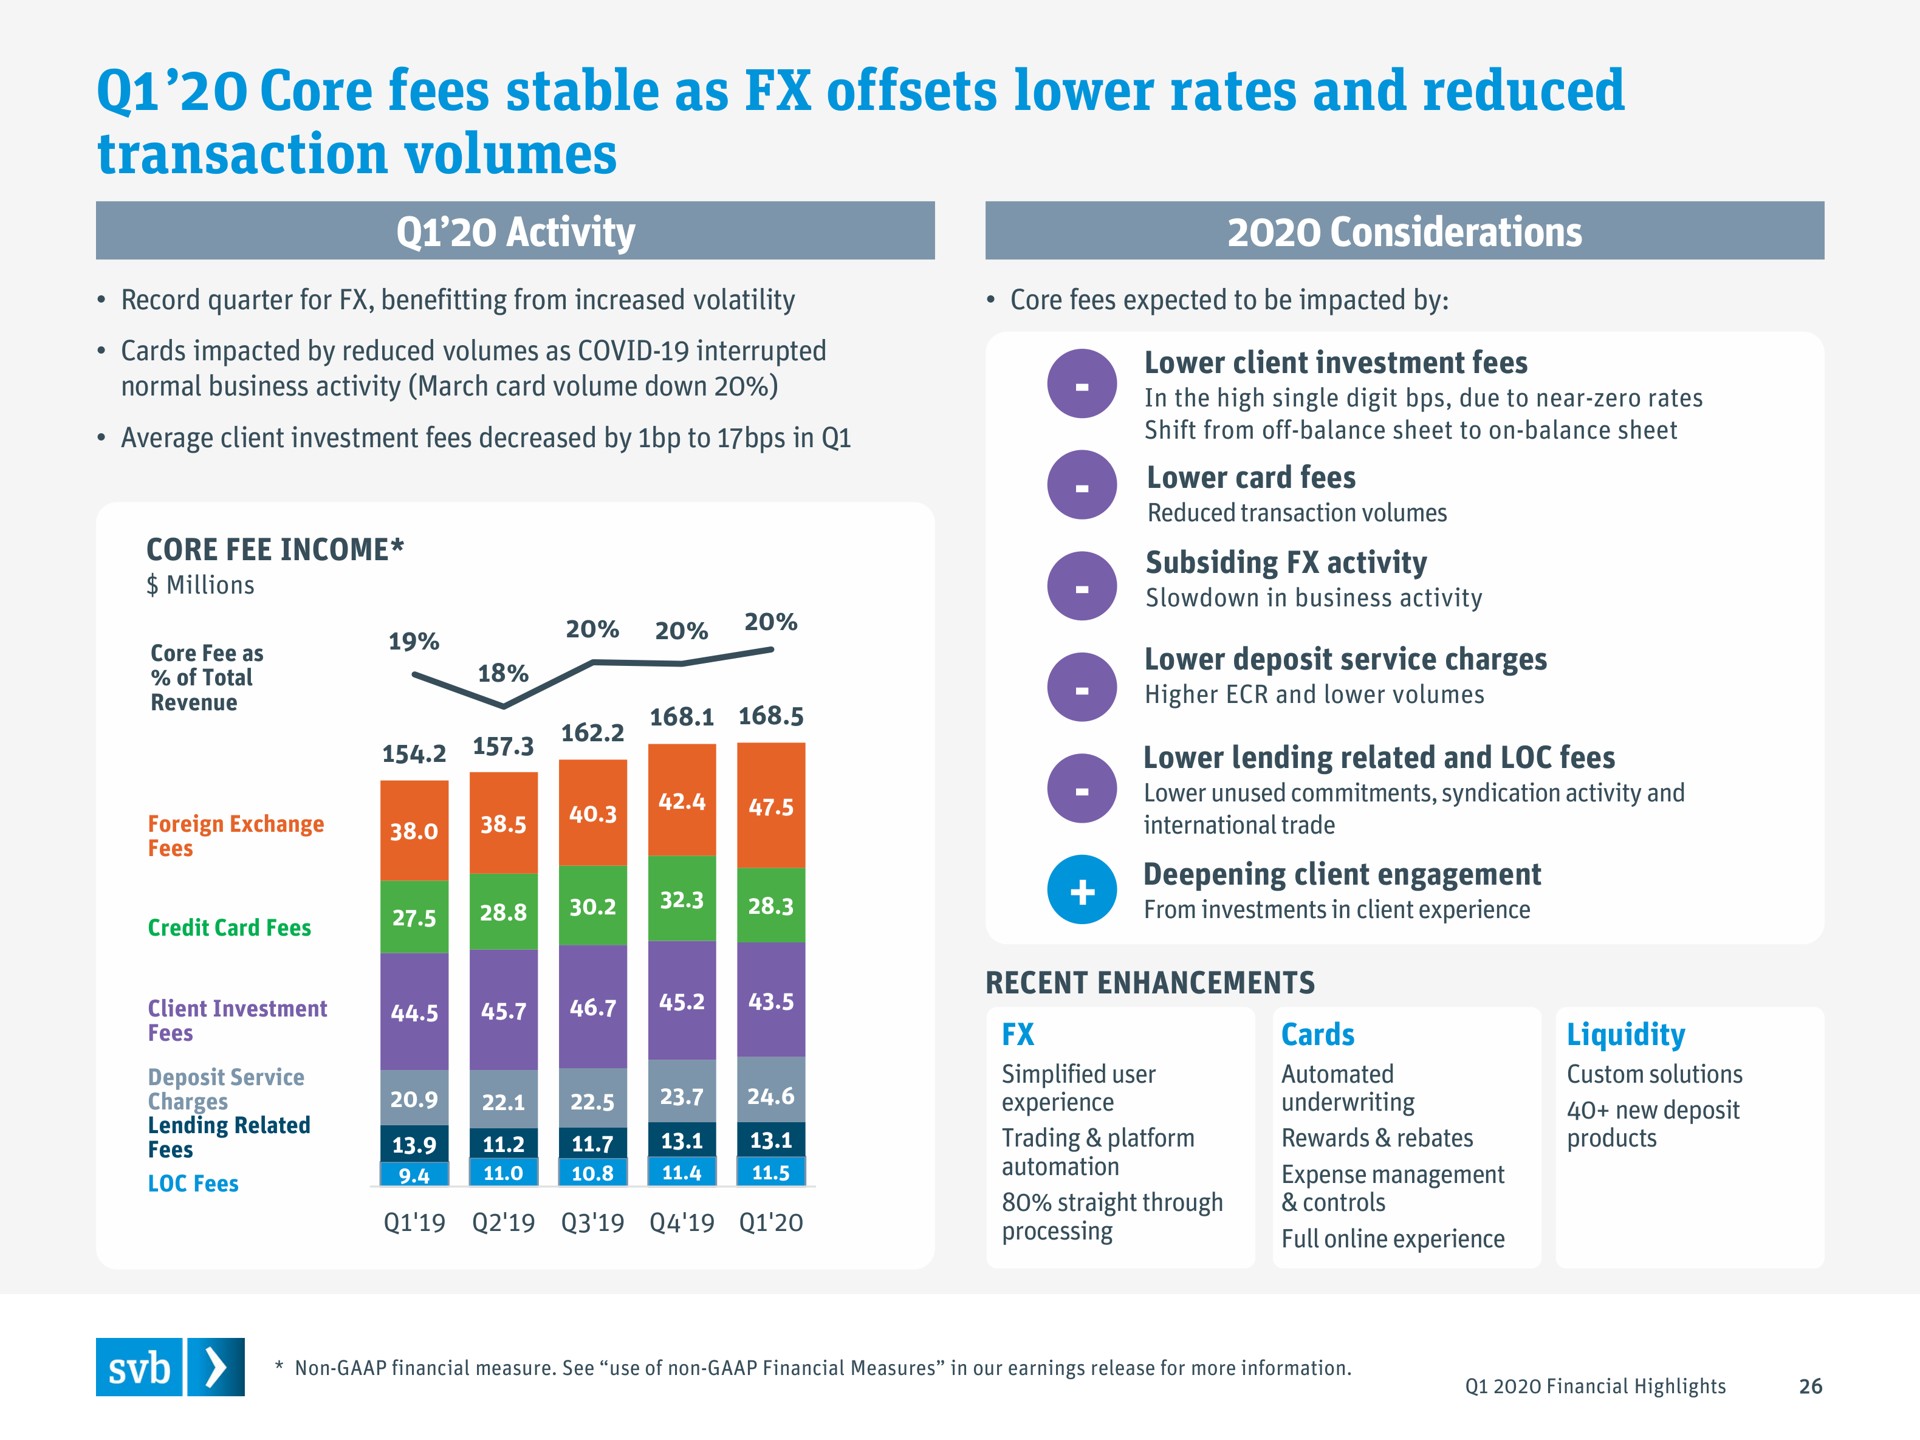 core fees stable as offsets lower rates and reduced transaction volumes | Silicon Valley Bank